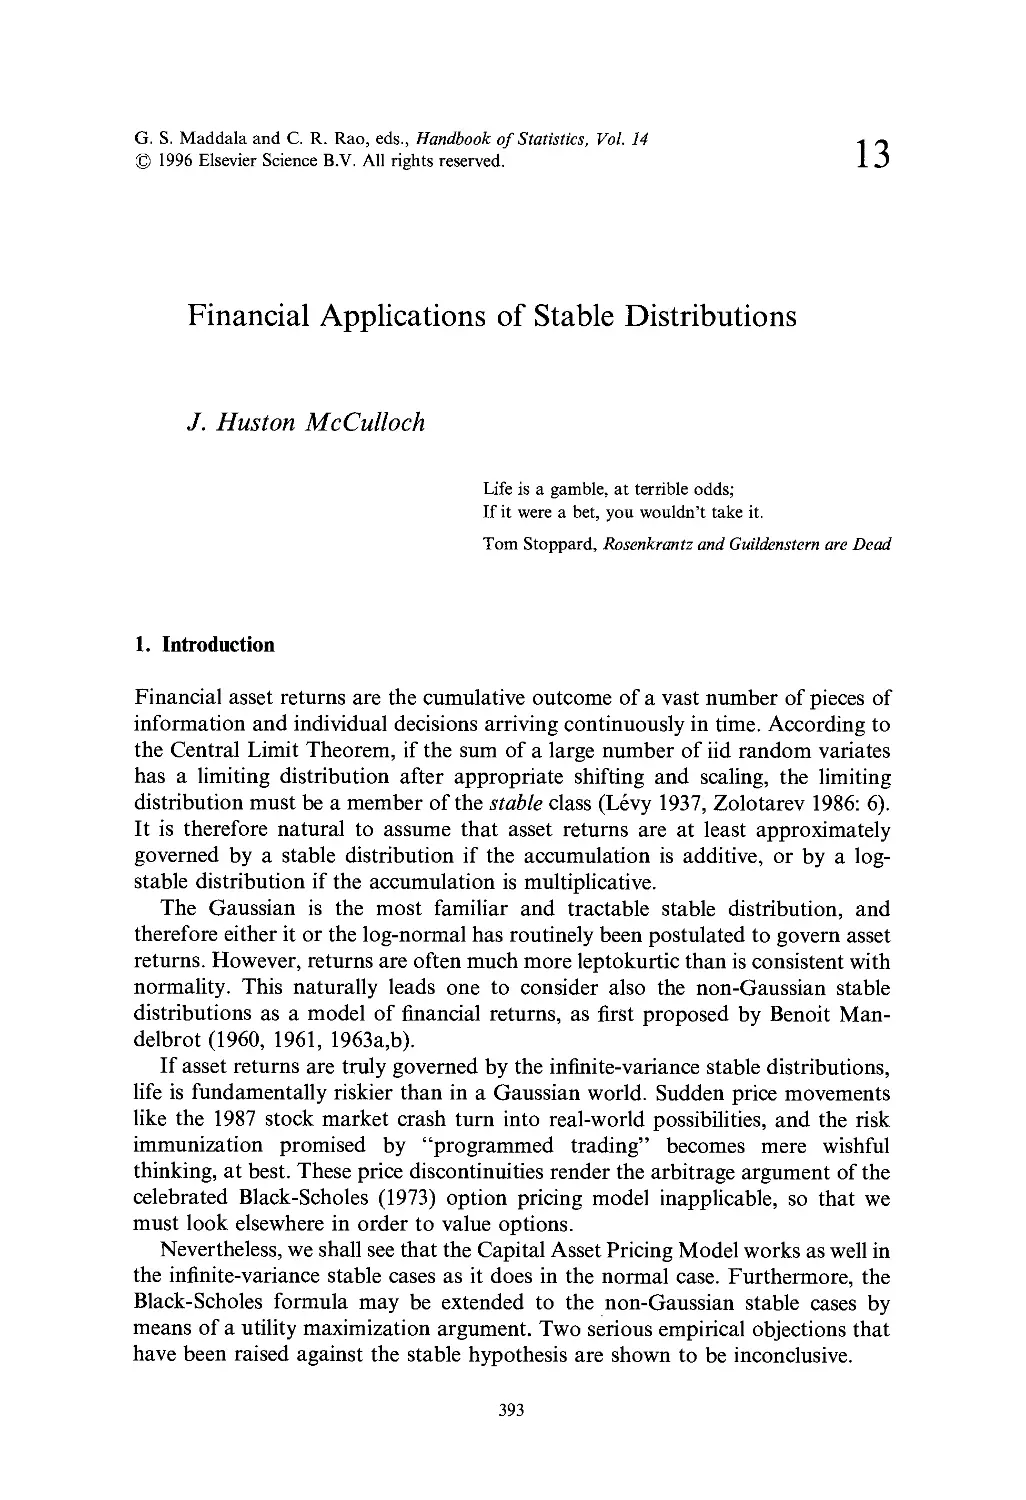 13. Financial Applications of Stable Distributions